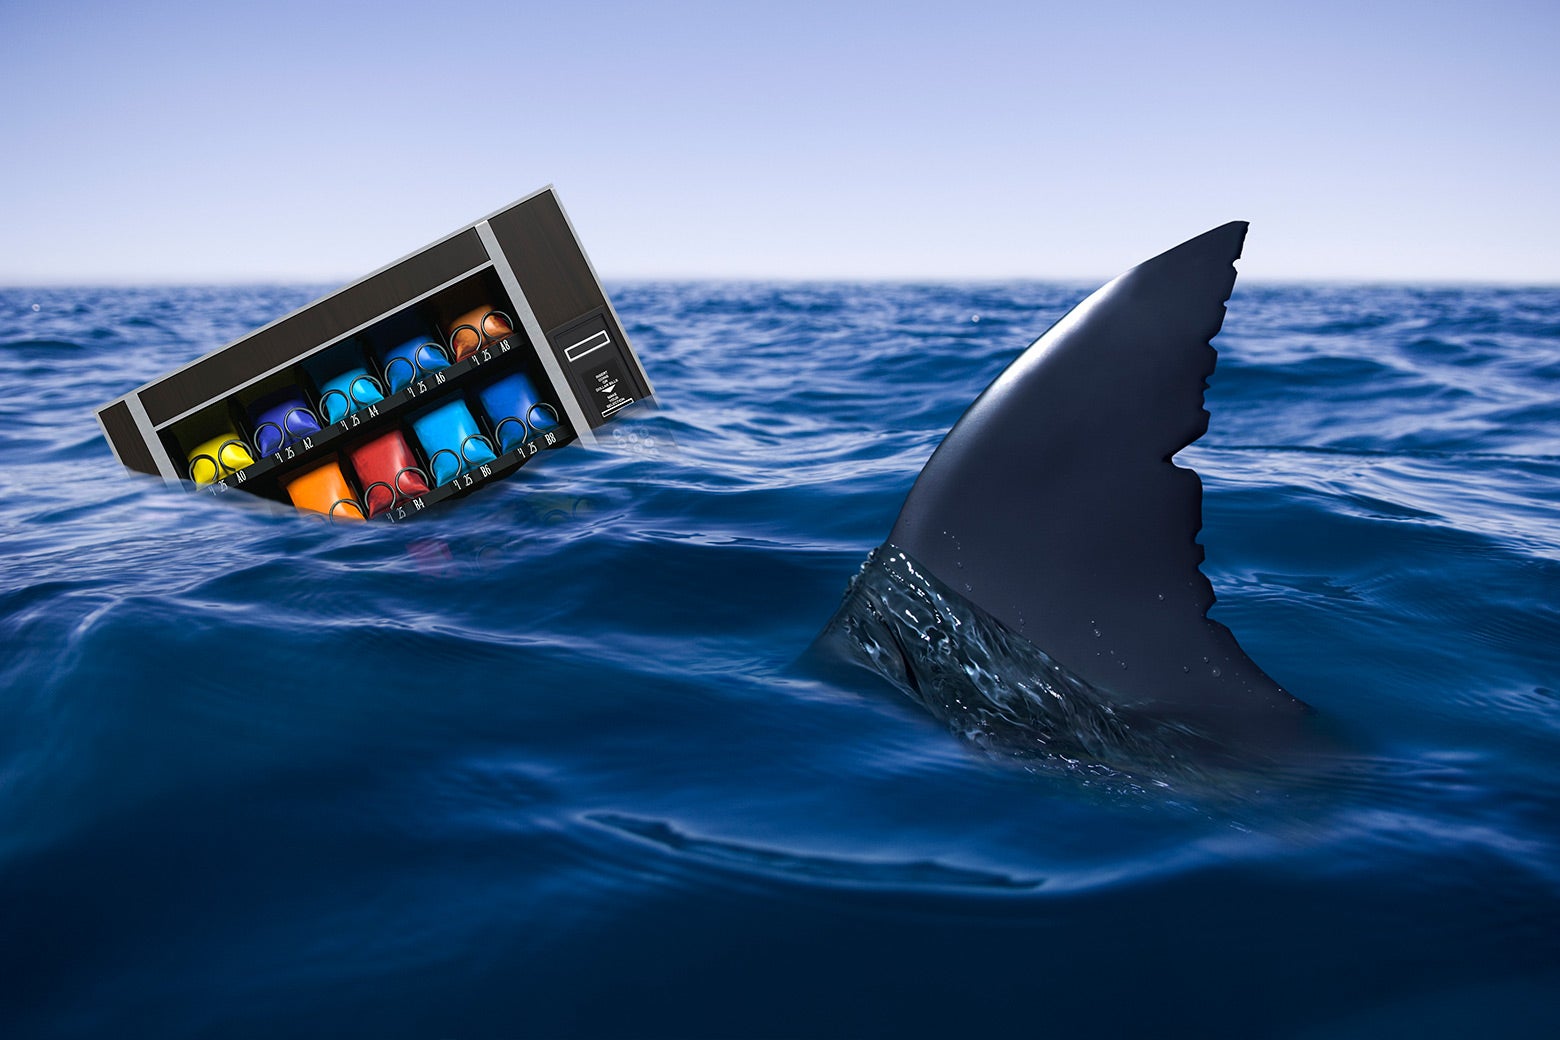 Sharks vs. vending machines: Which kills more people yearly?